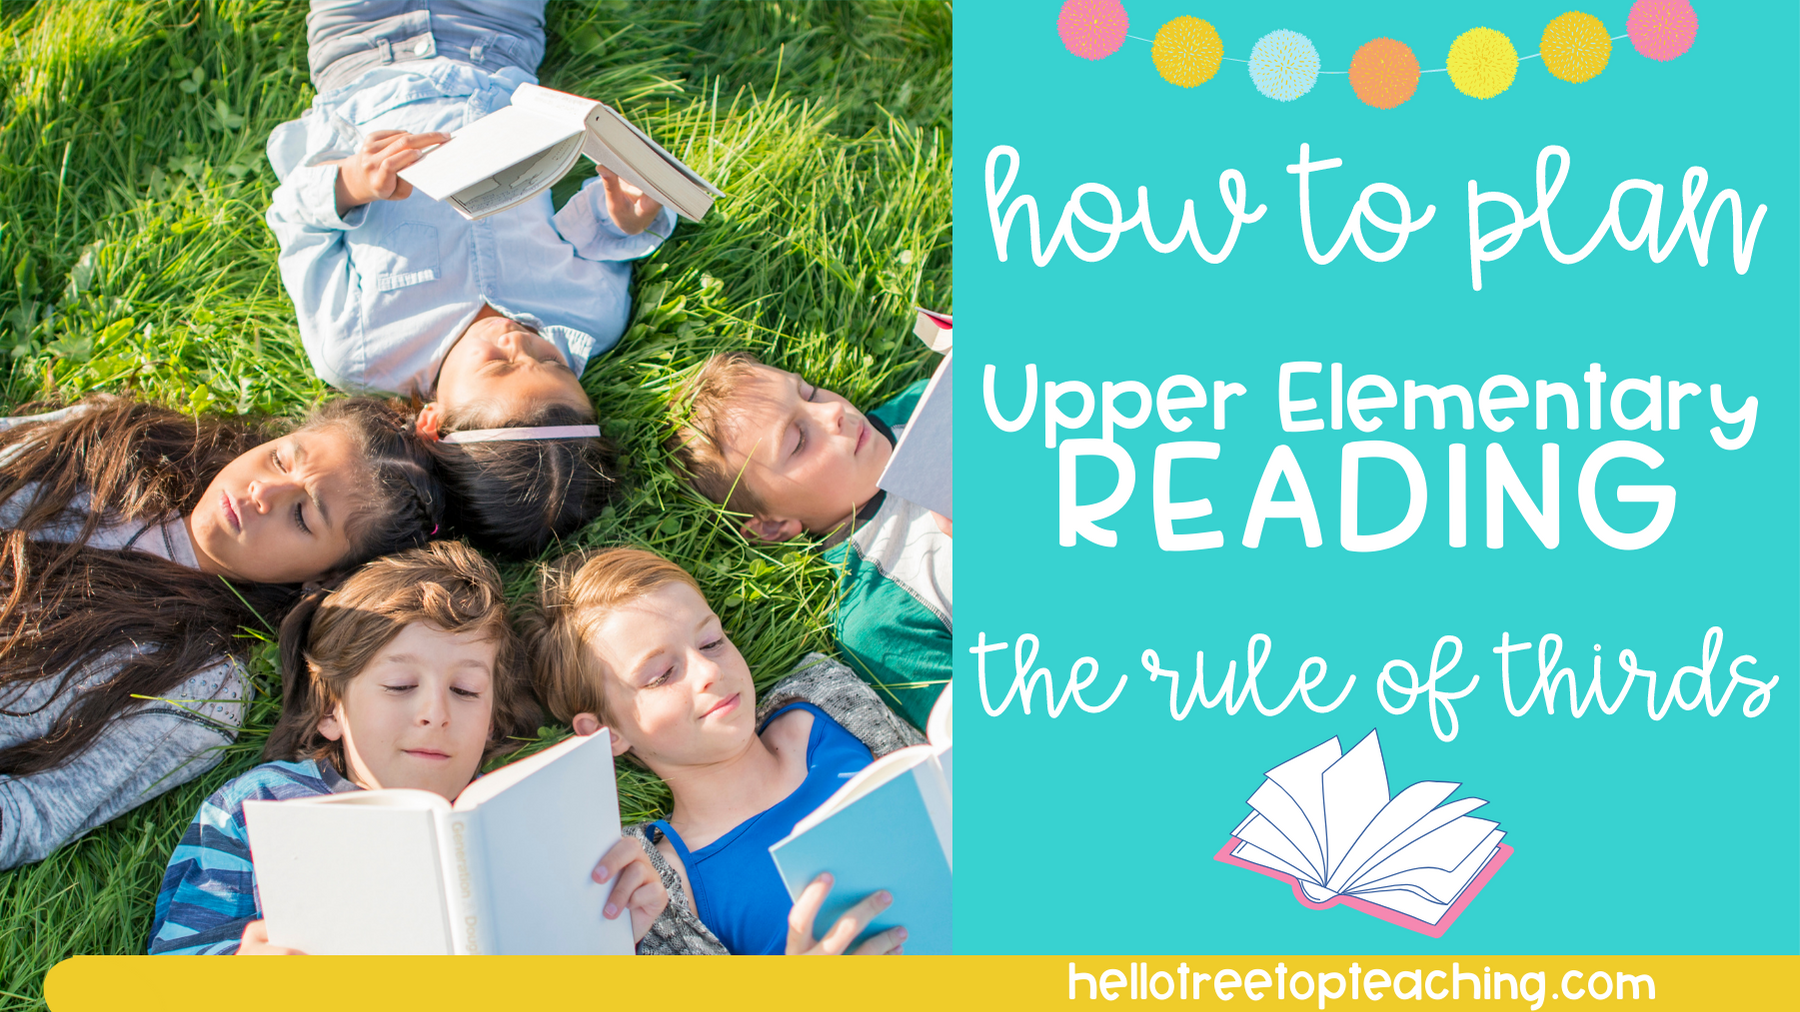 How to plan upper elementary reading instructional time using the rule of thirds